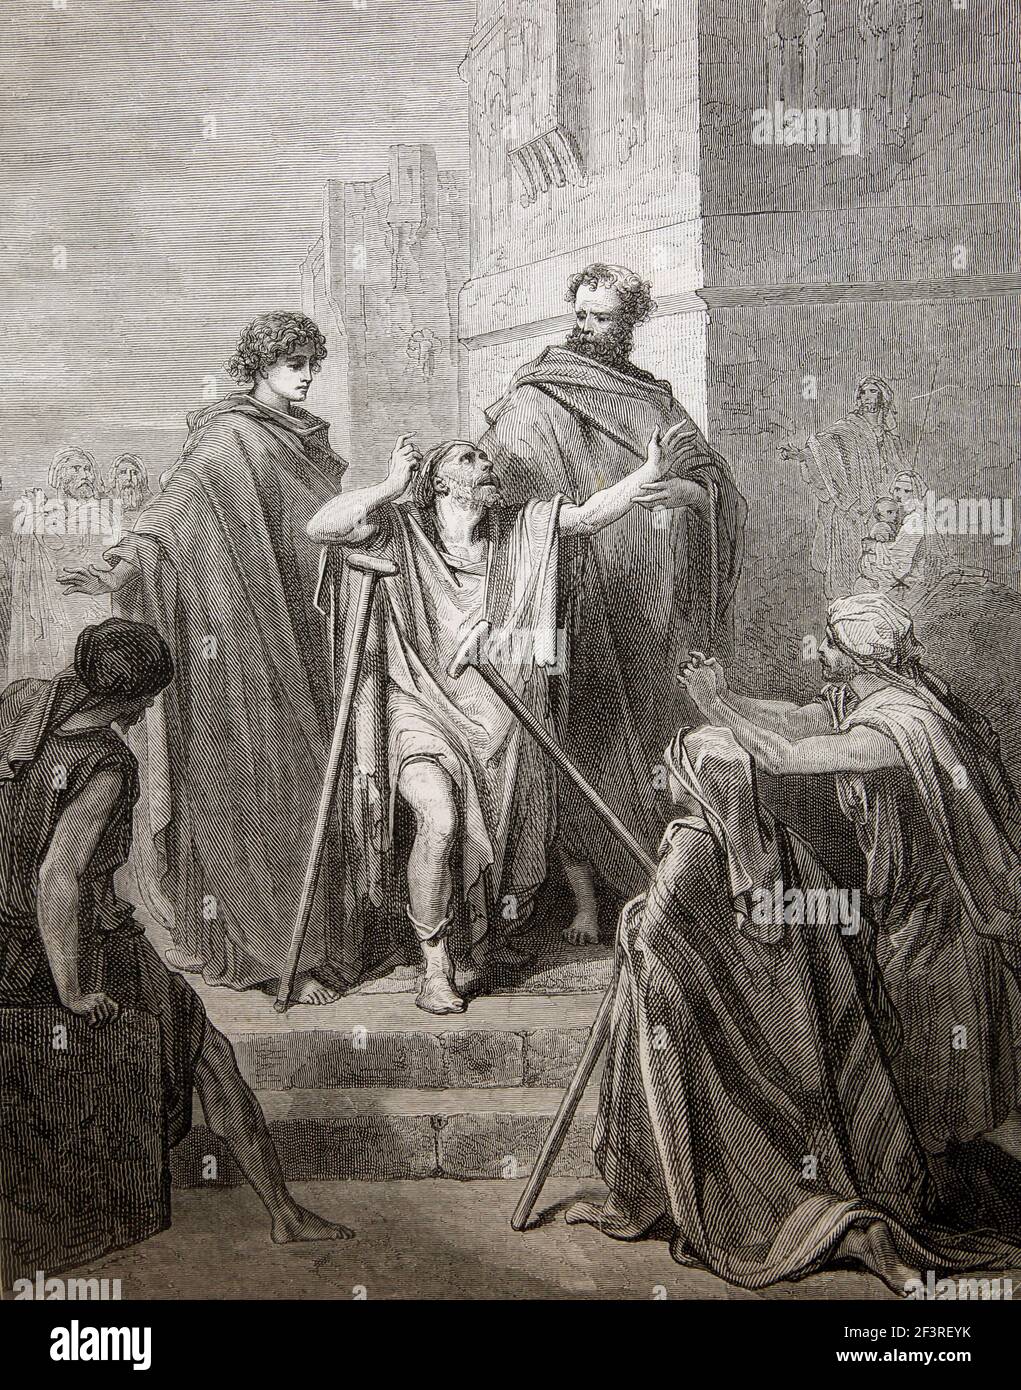 Bible Stories - Illustration of Saint Peter and Saint John at the Beautiful Gate Healing the Crippled Man from the New Testament Acts 3: 6-7 Stock Photo